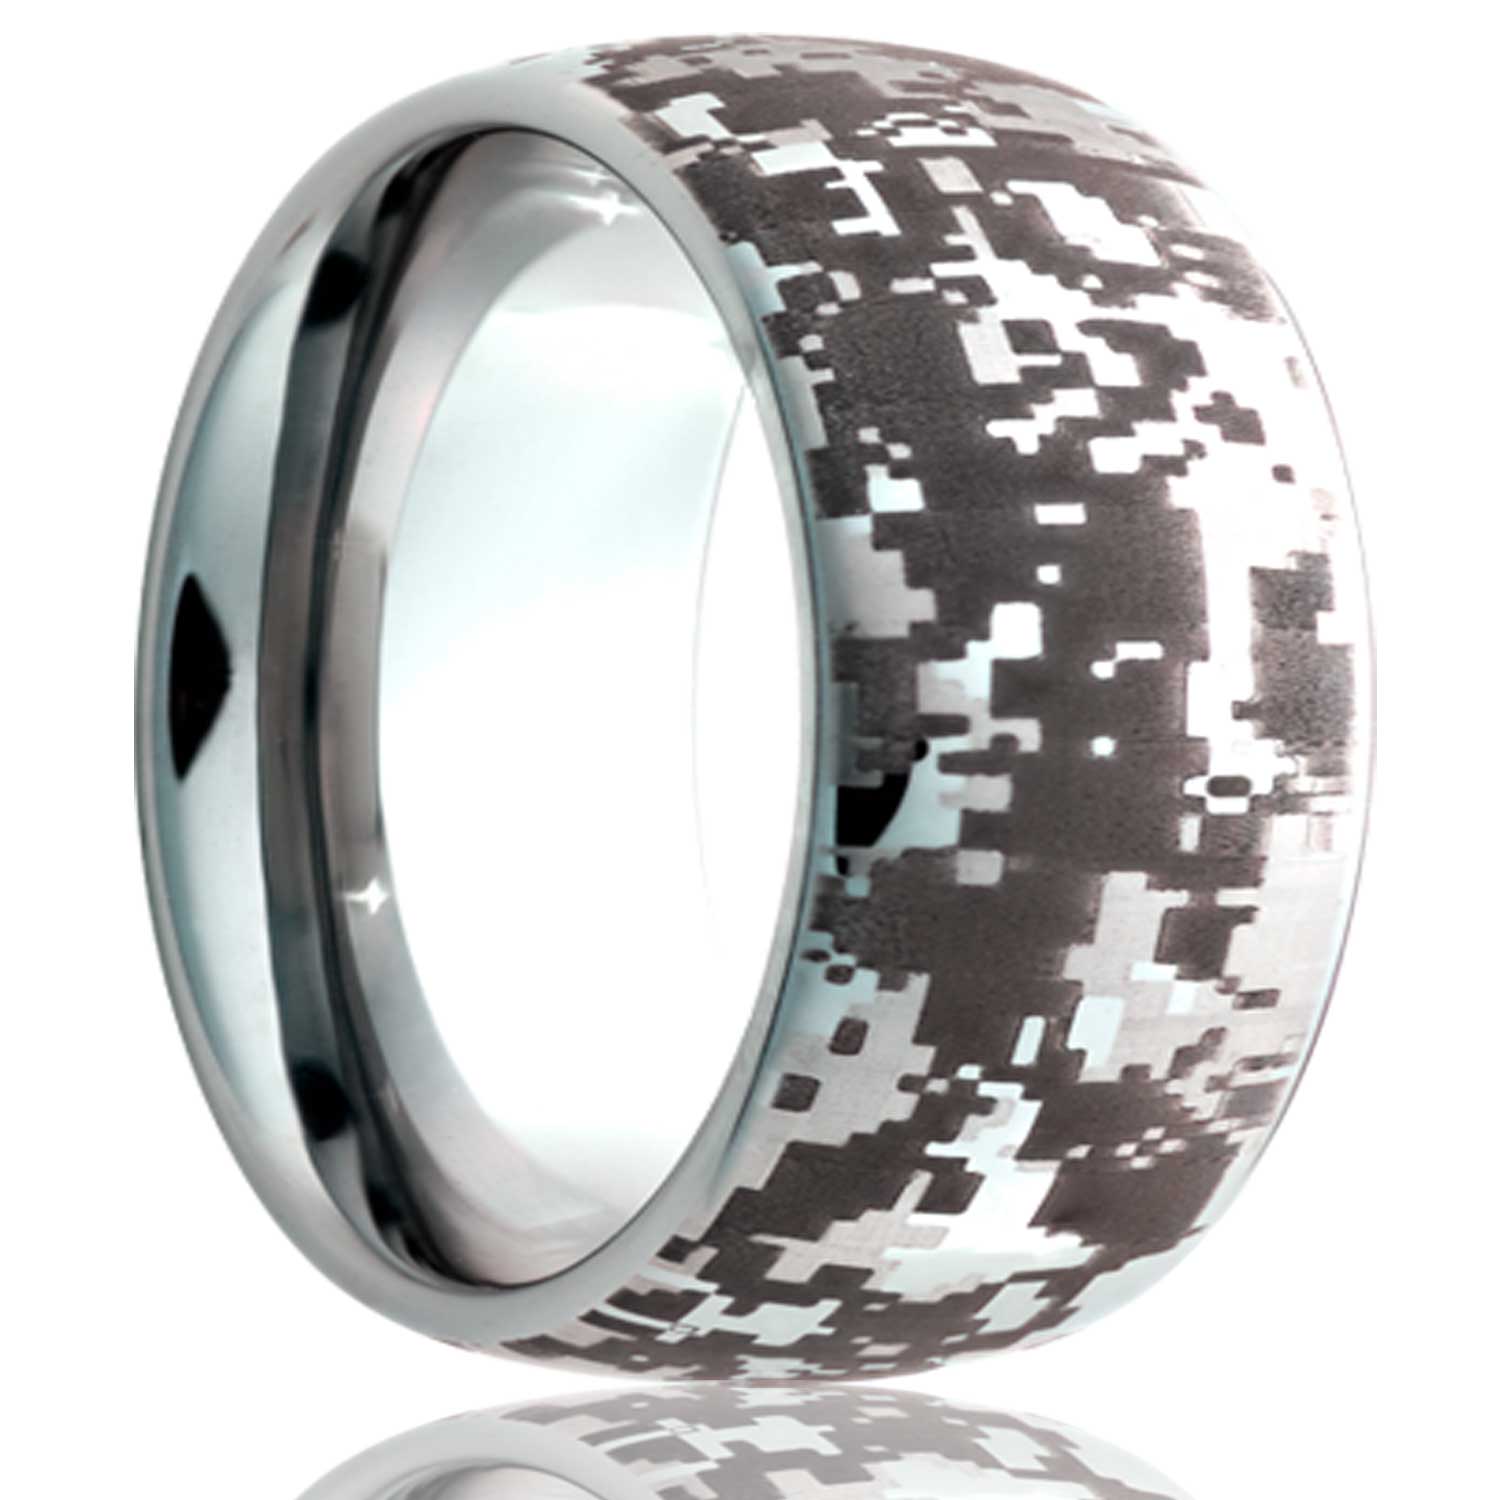 A digital camo domed cobalt wedding band displayed on a neutral white background.